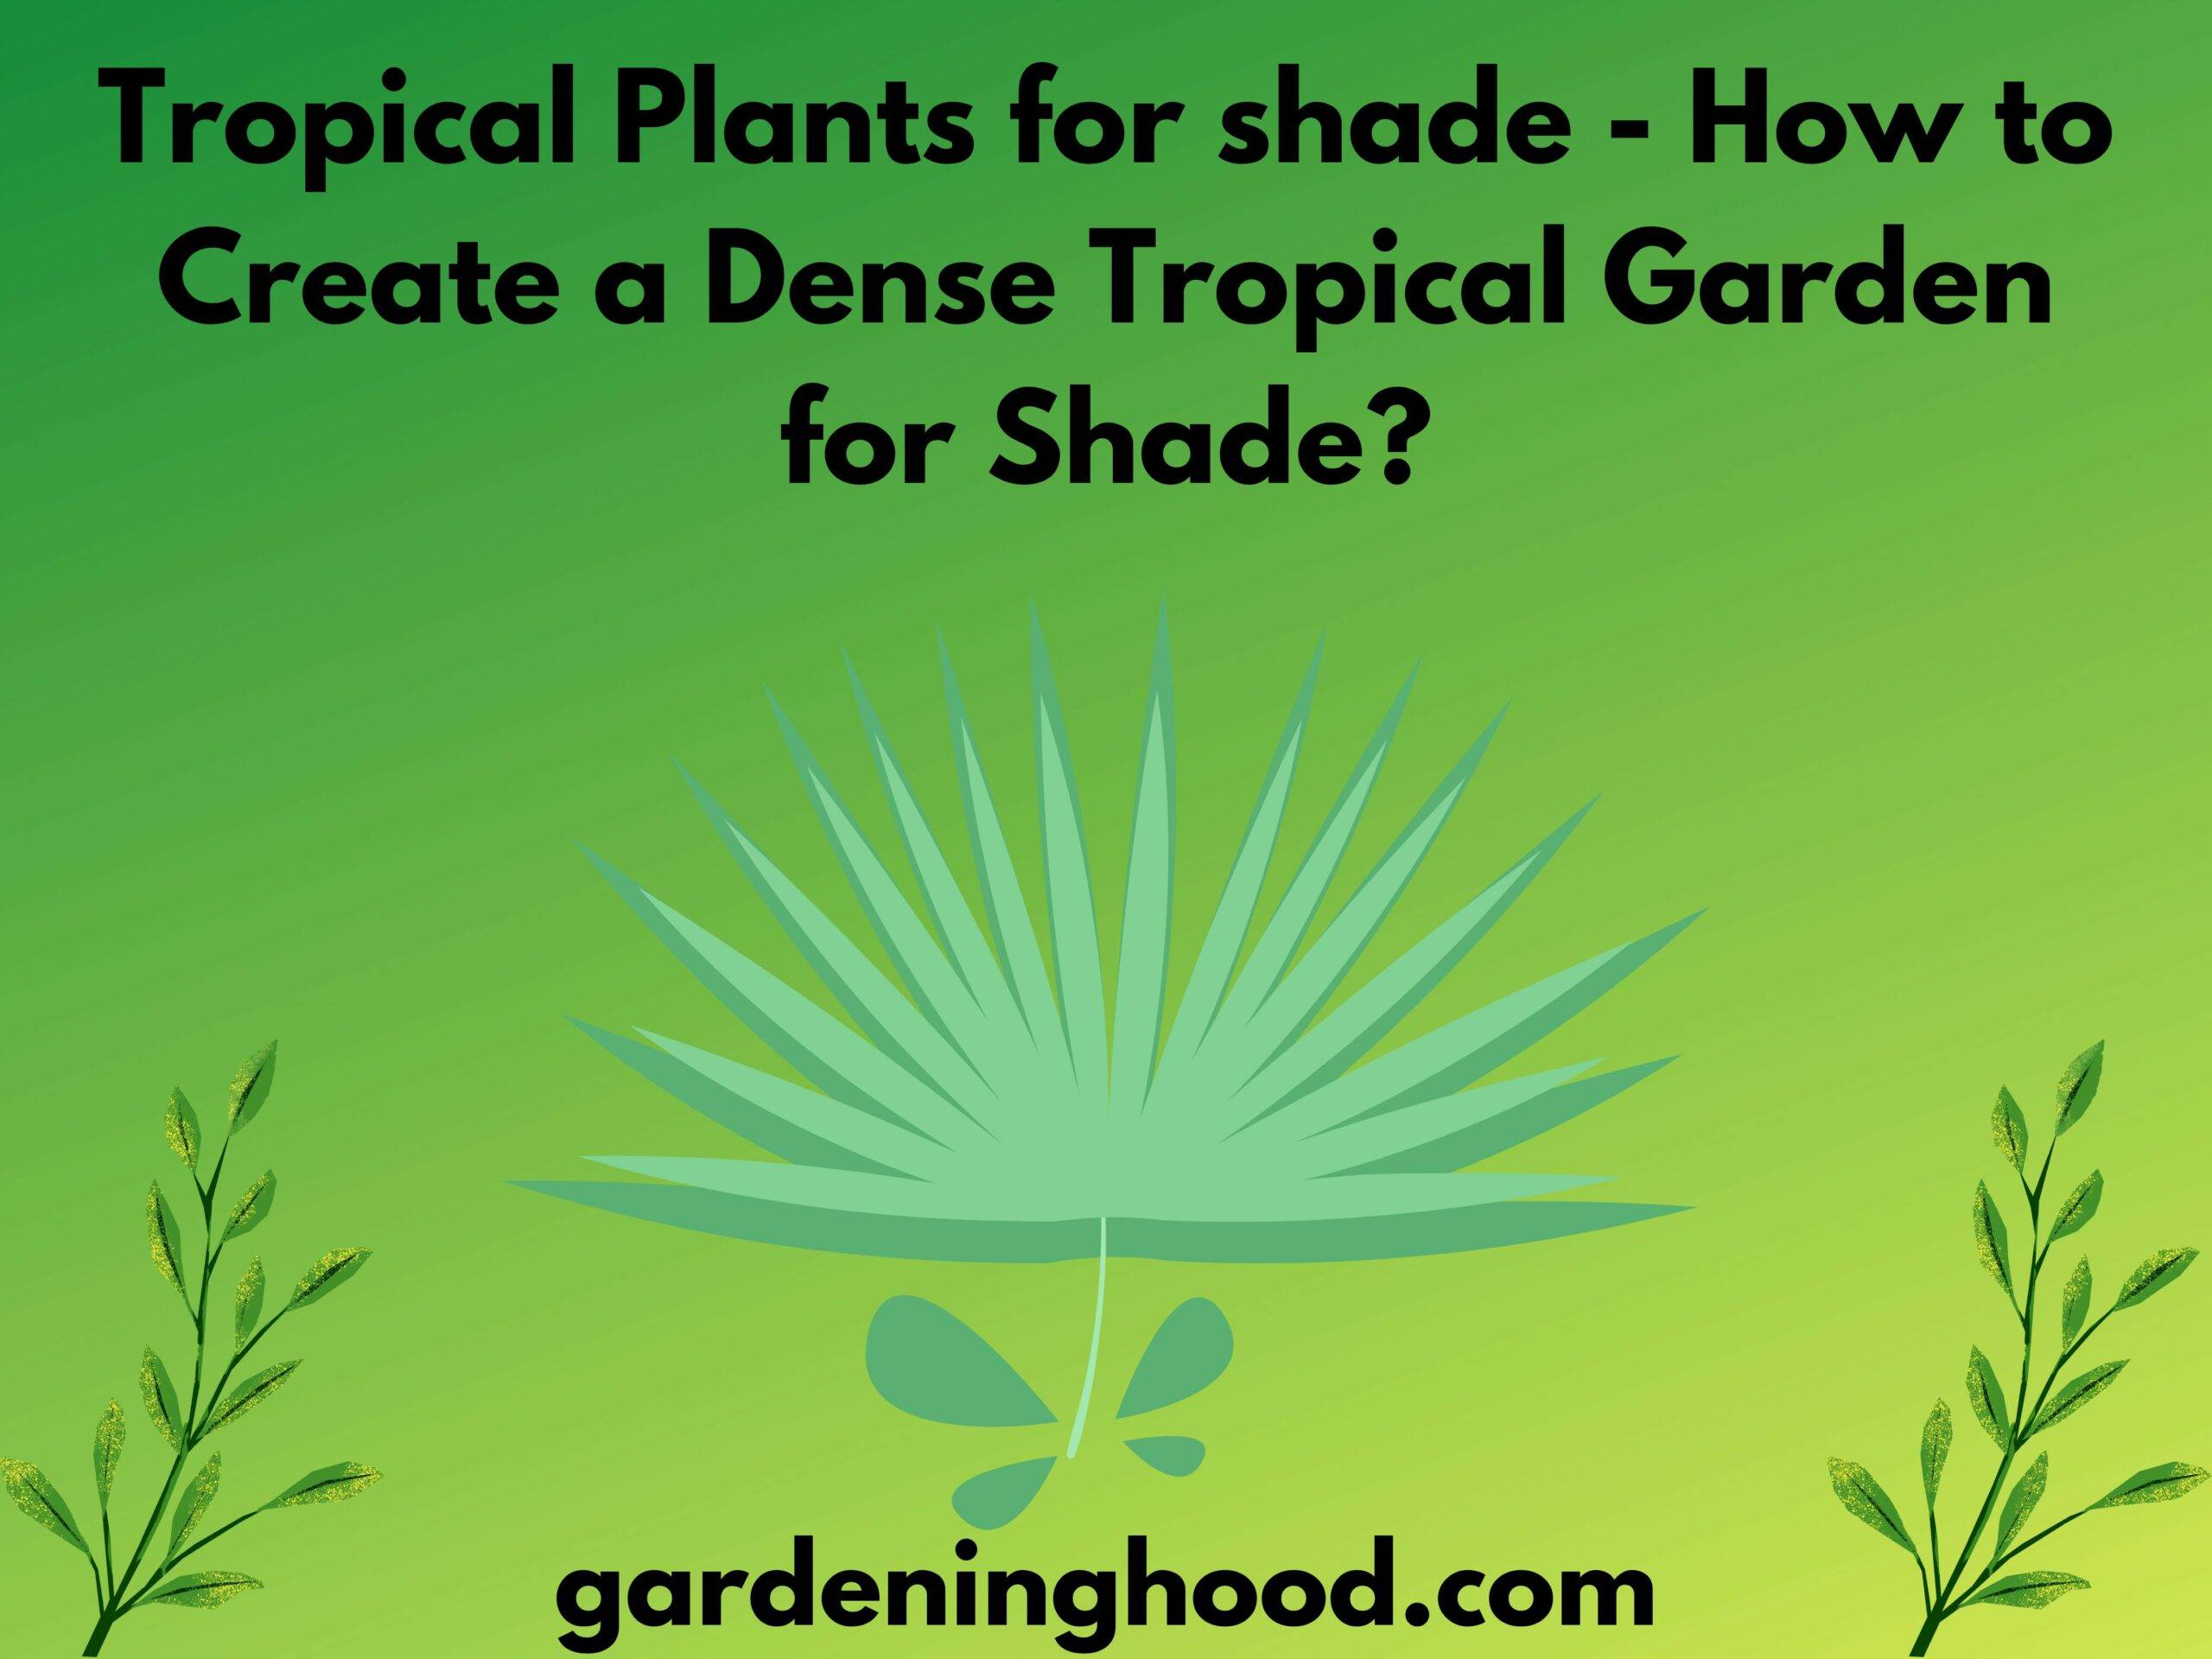 Tropical Plants for shade - How to Create a Dense Tropical Garden for Shade?